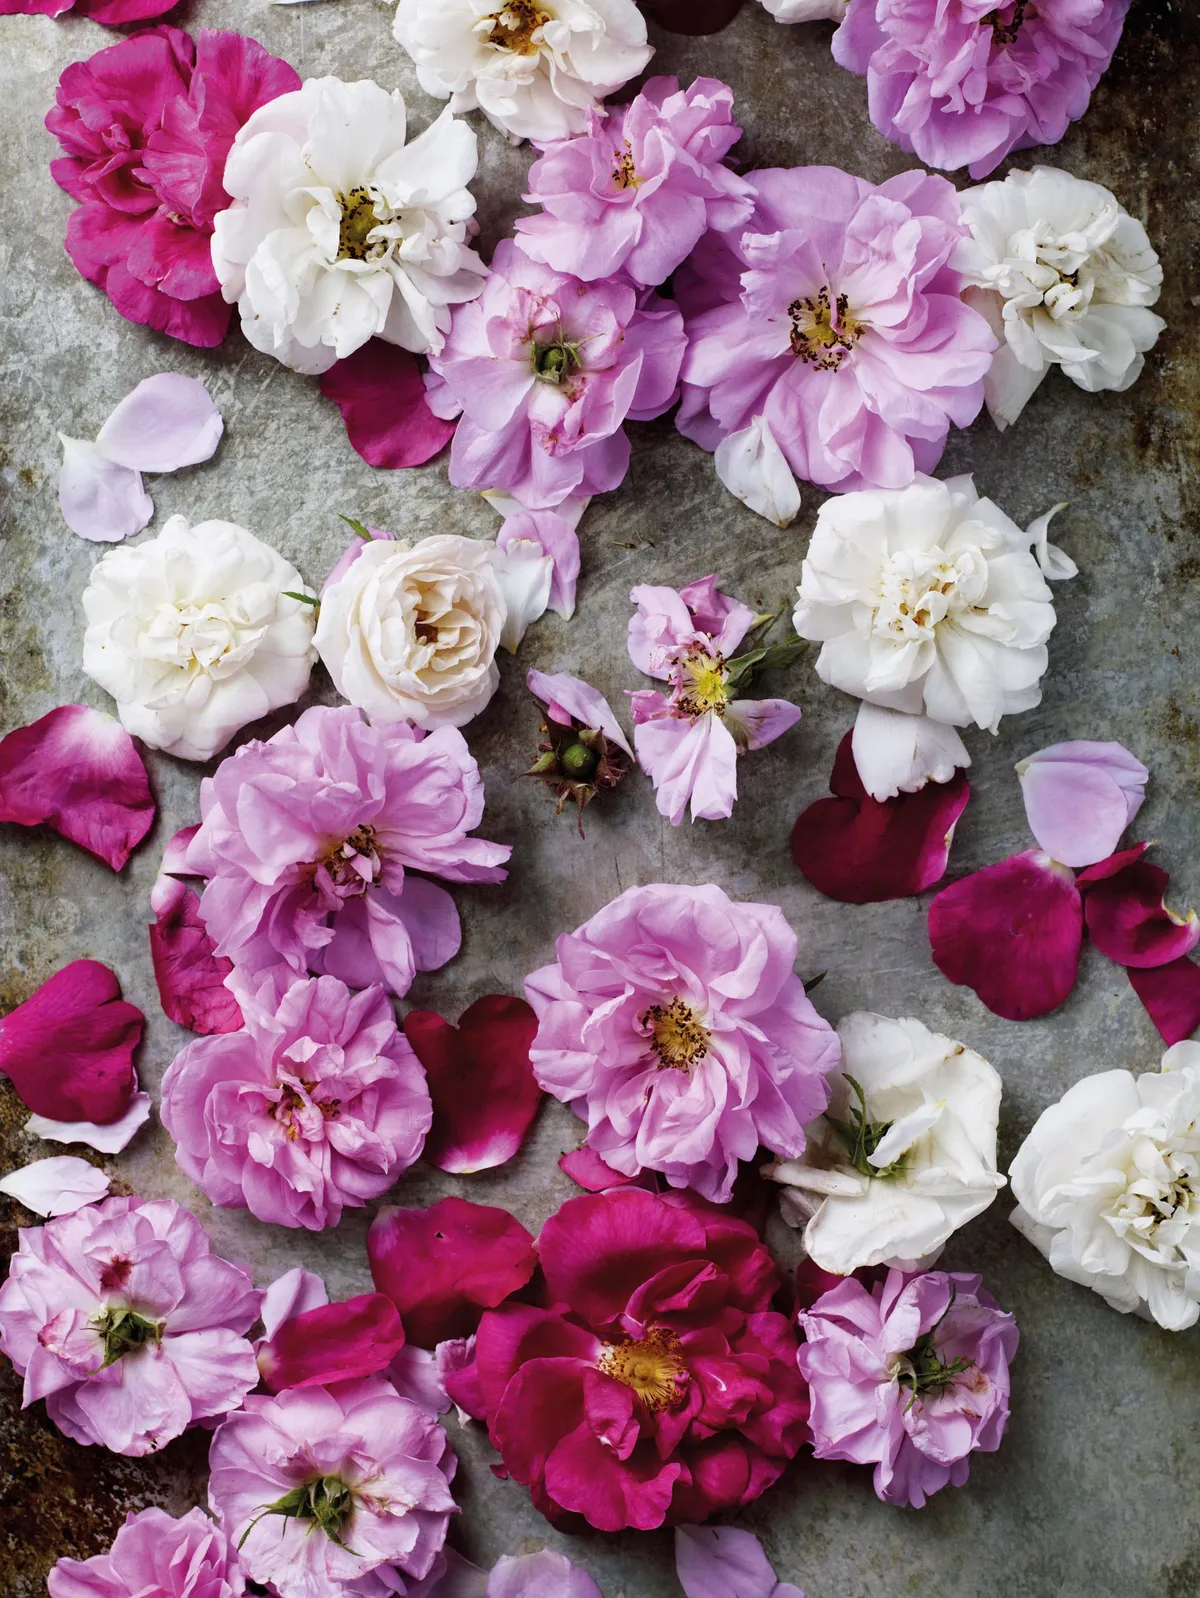 Rose petals collected for rose water